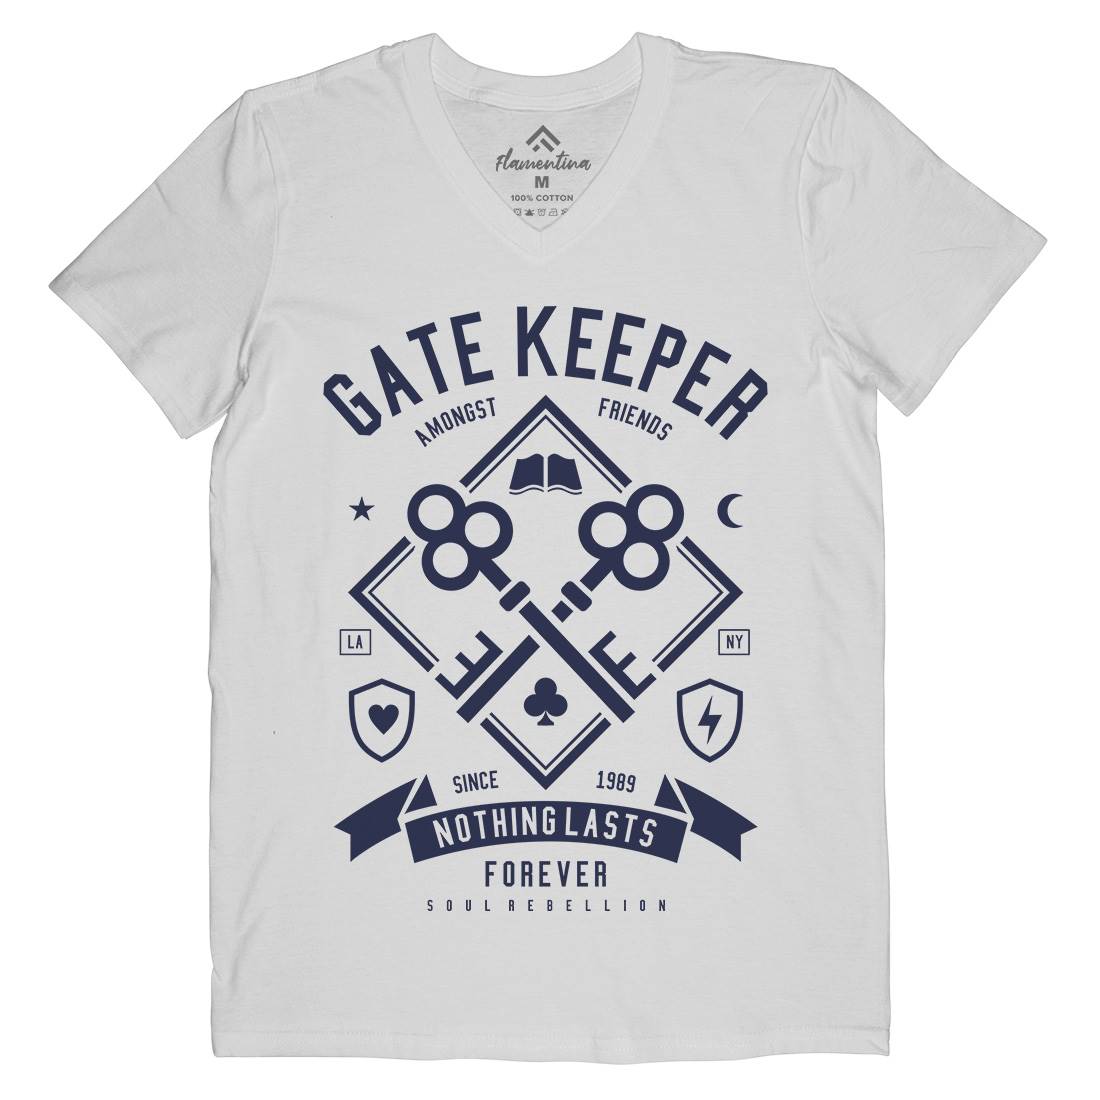 Gate Keeper Mens V-Neck T-Shirt Quotes A232